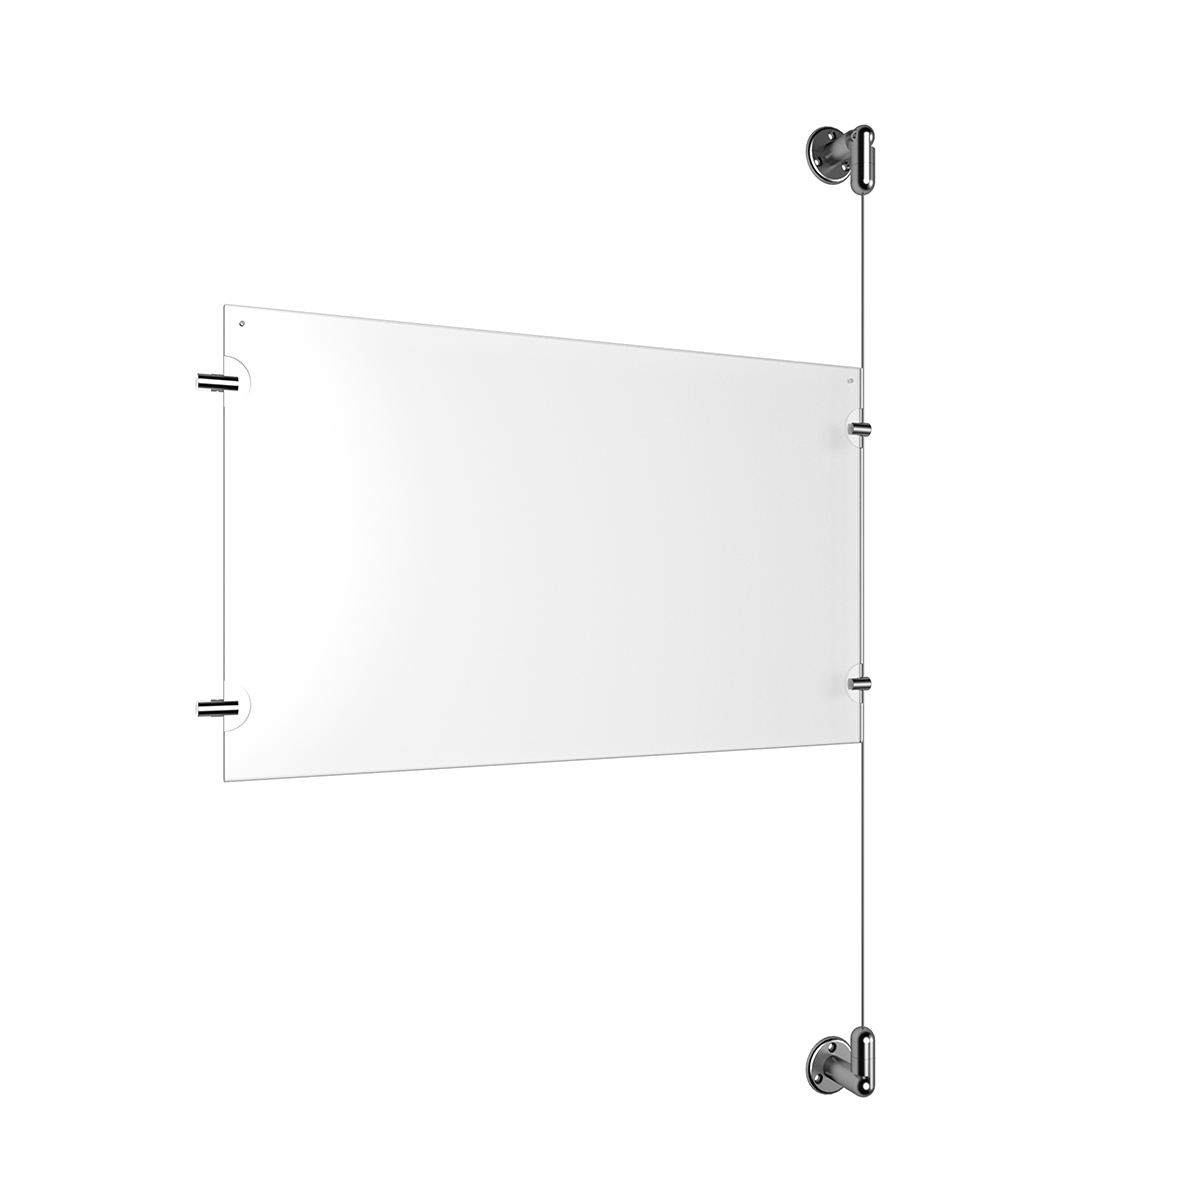 (1) 17'' Width x 11'' Height Clear Acrylic Frame & (1) Aluminum Clear Anodized Adjustable Angle Cable Systems with (2) Single-Sided Panel Grippers (2) Double-Sided Panel Grippers